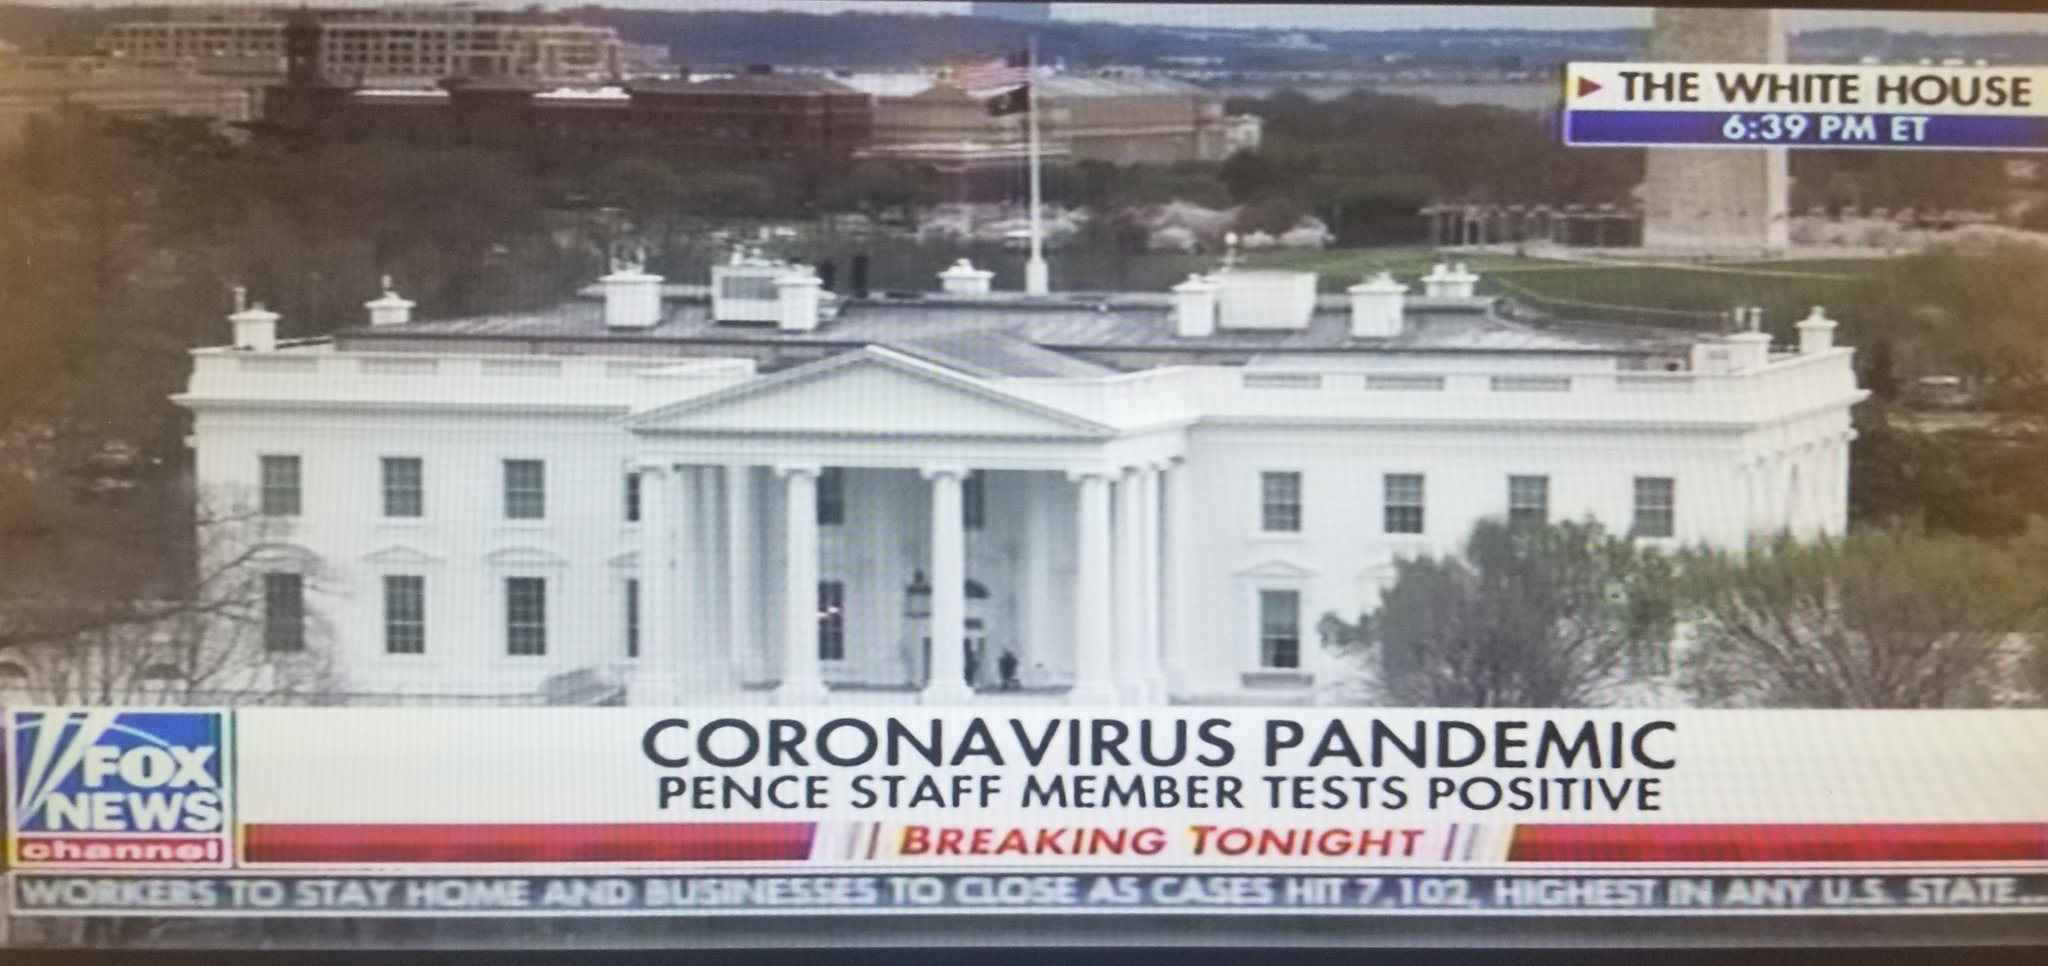 Lisa Mei Crowley ? on Twitter: "Fox News just reported a member of @VP's staff has tested positive for Coronavirus.… "